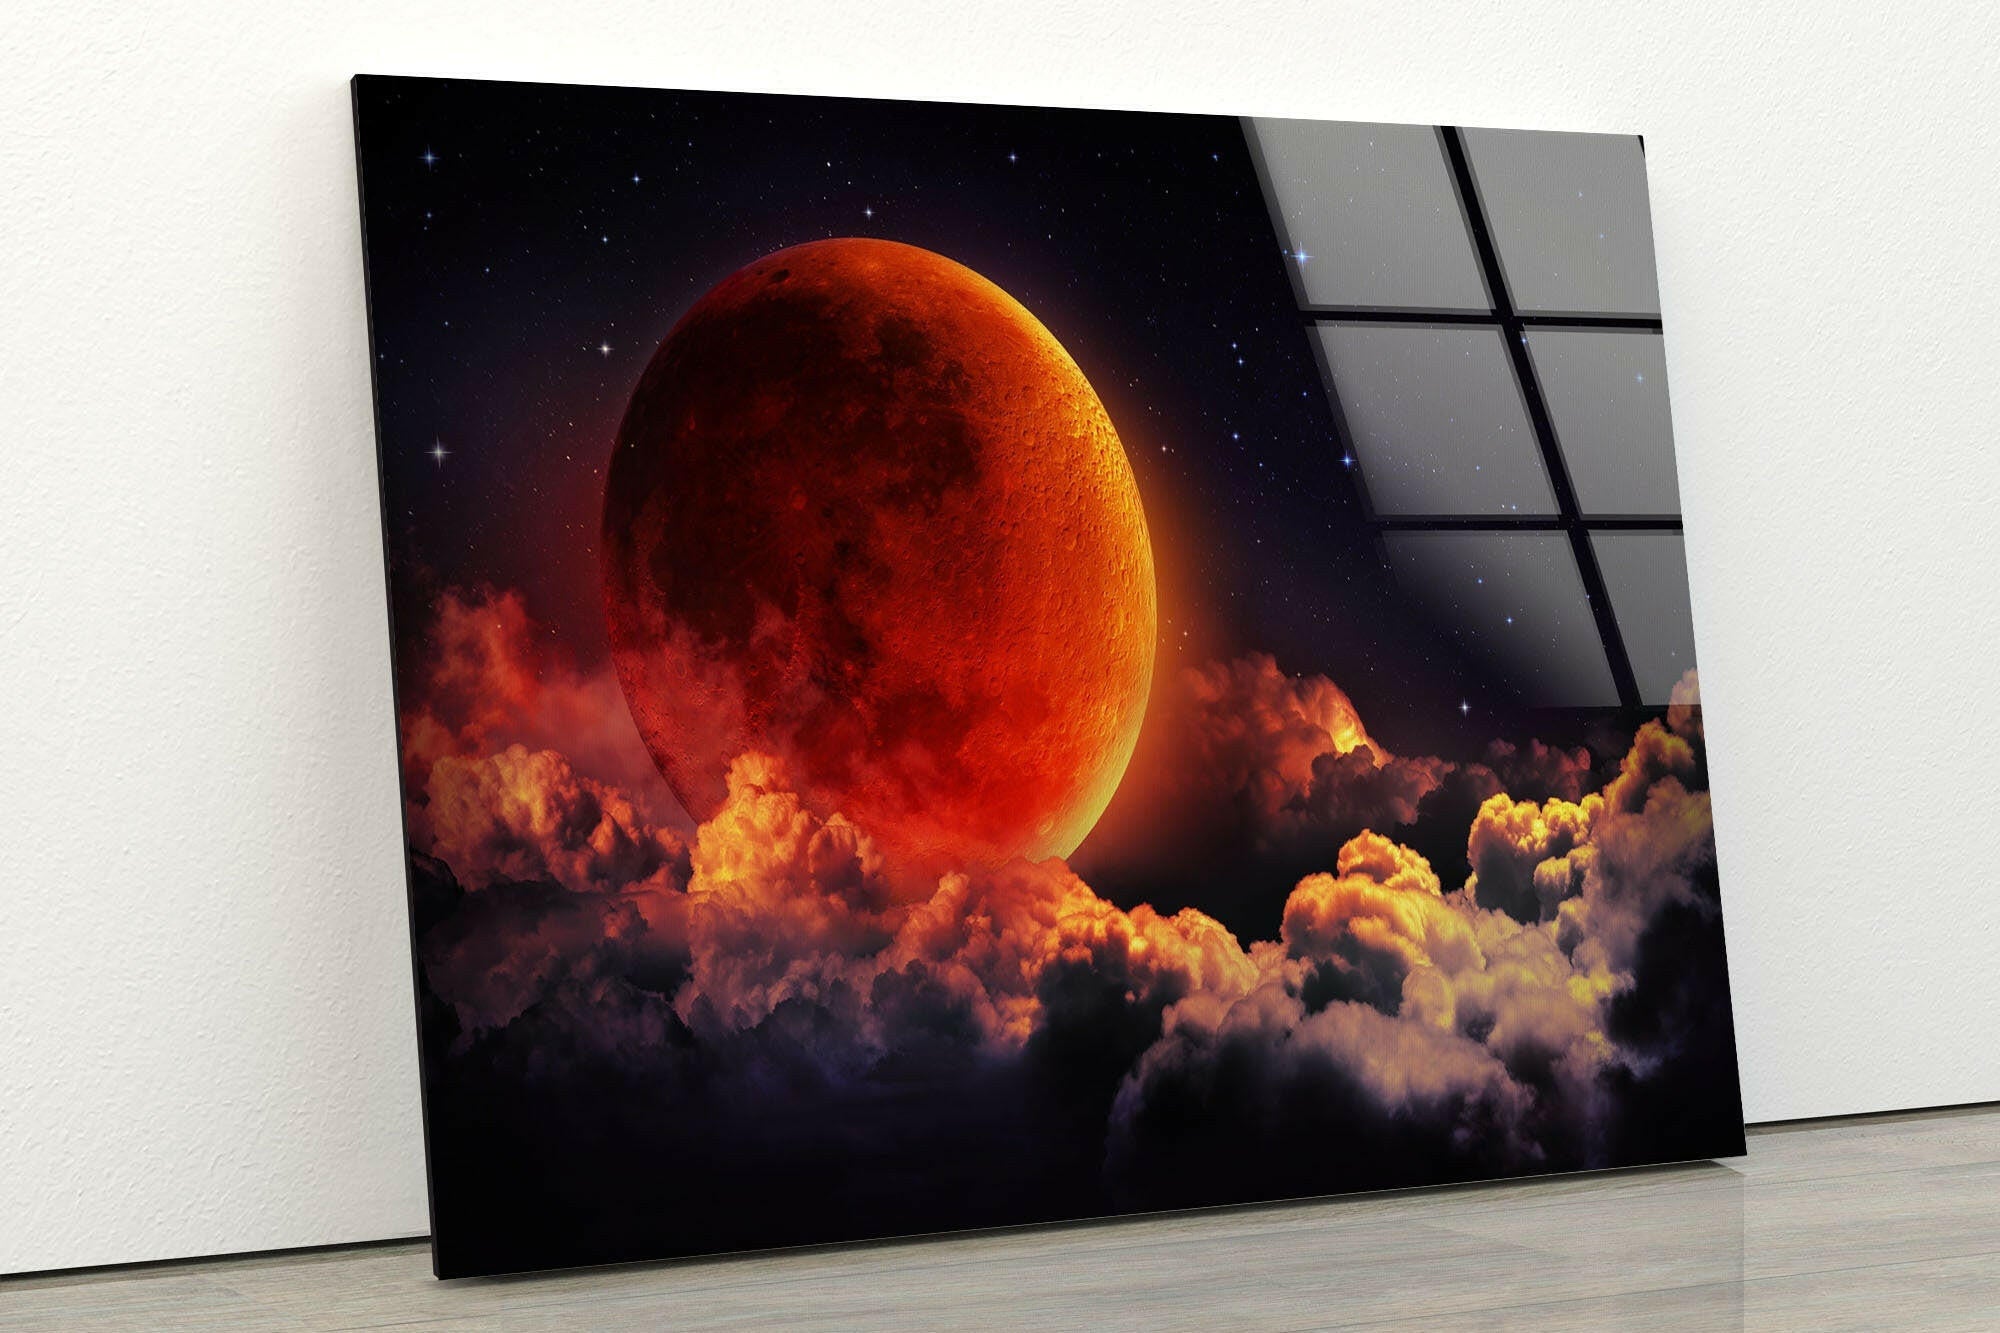 Red Full Moon Tempered Glass Wall Art